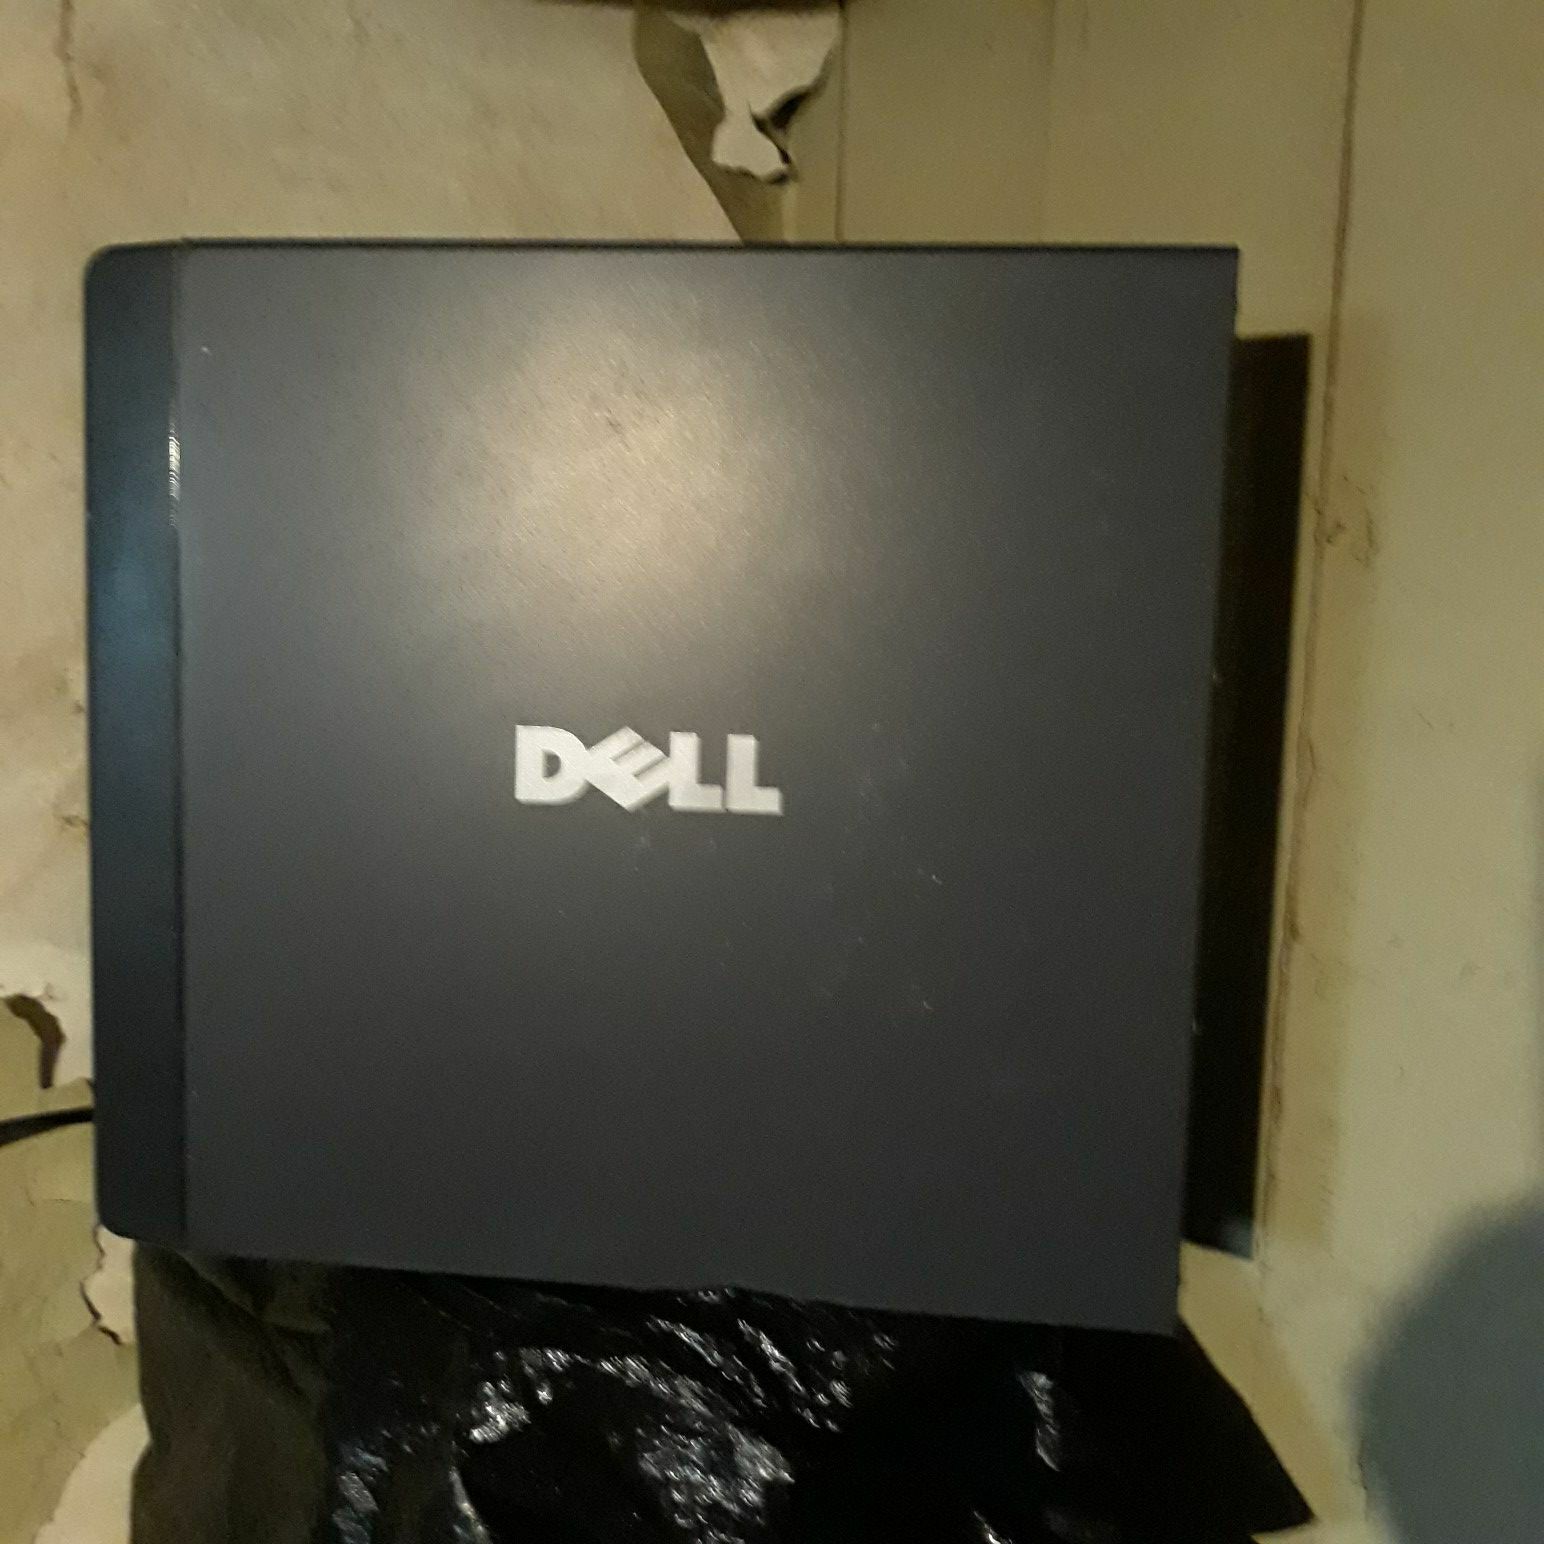 Dell computer with tower and keyboard/speakers